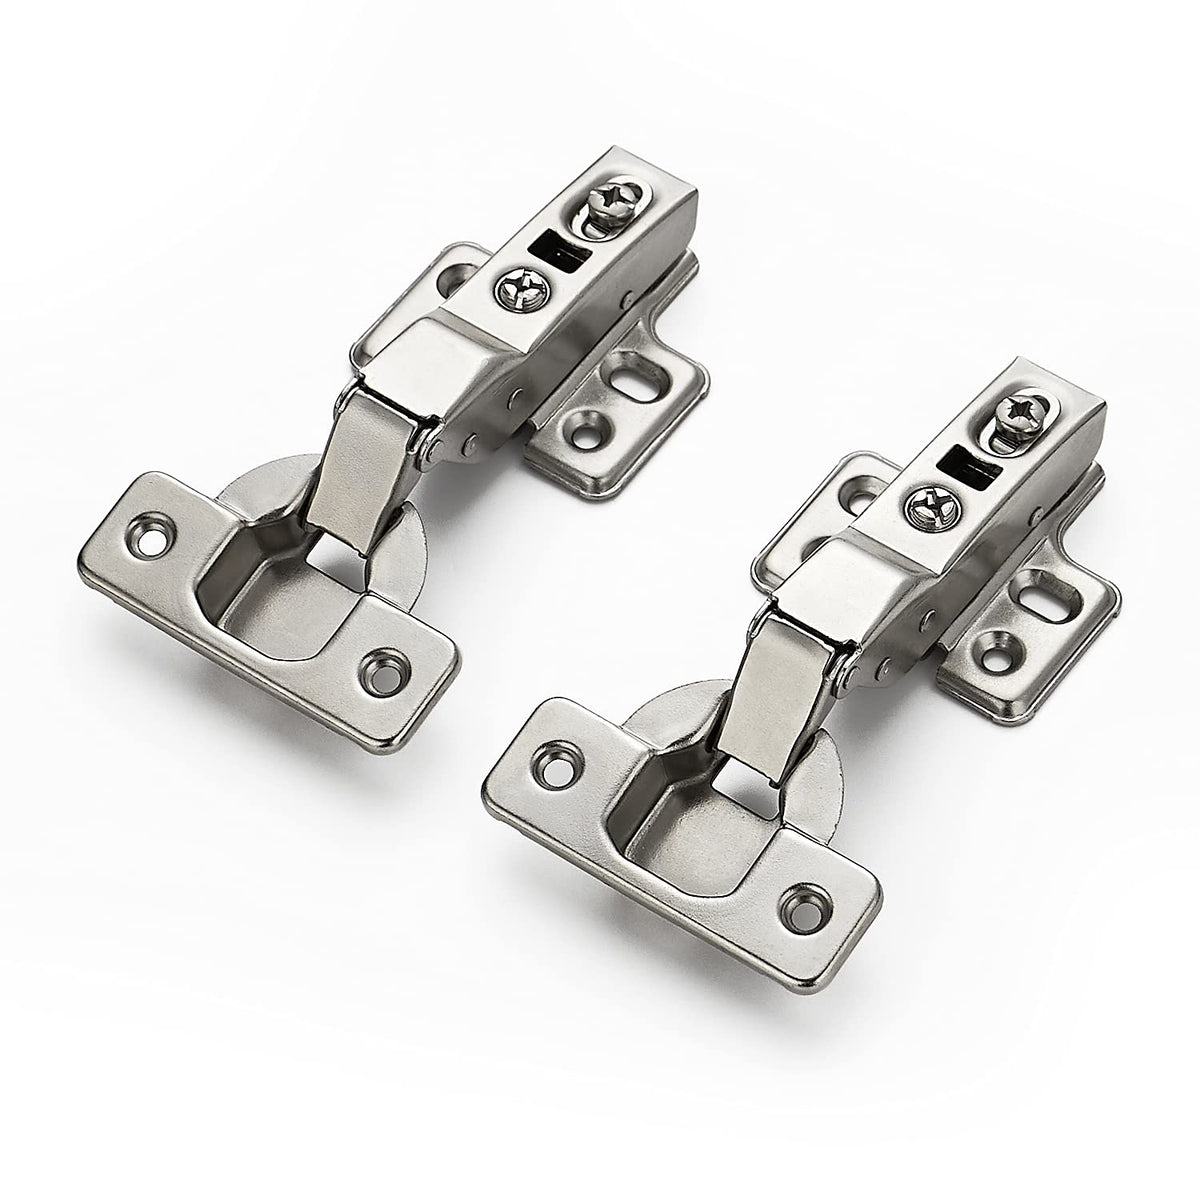 Soft Close Cabinet Hinges European Detachable Hinges Suitable For Kitchen Cabinets Door Pure Brass Damping -Homdiy